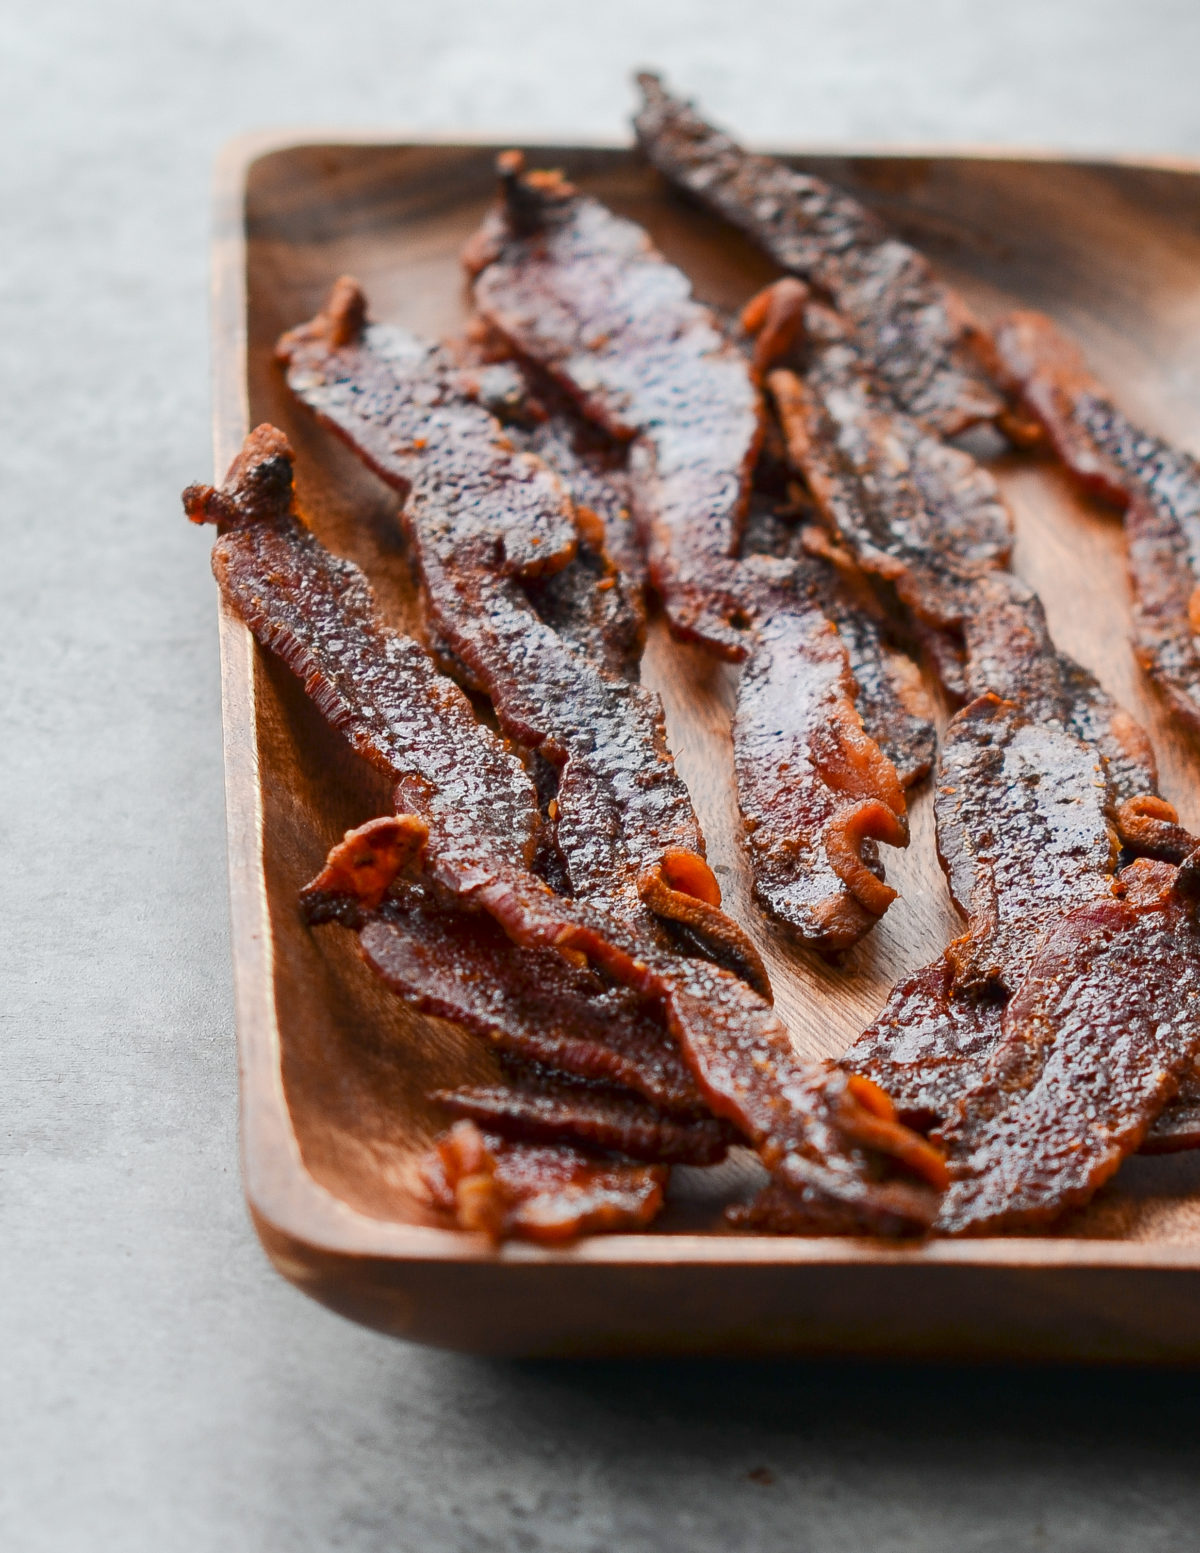 Wooden plate of candied bacon.